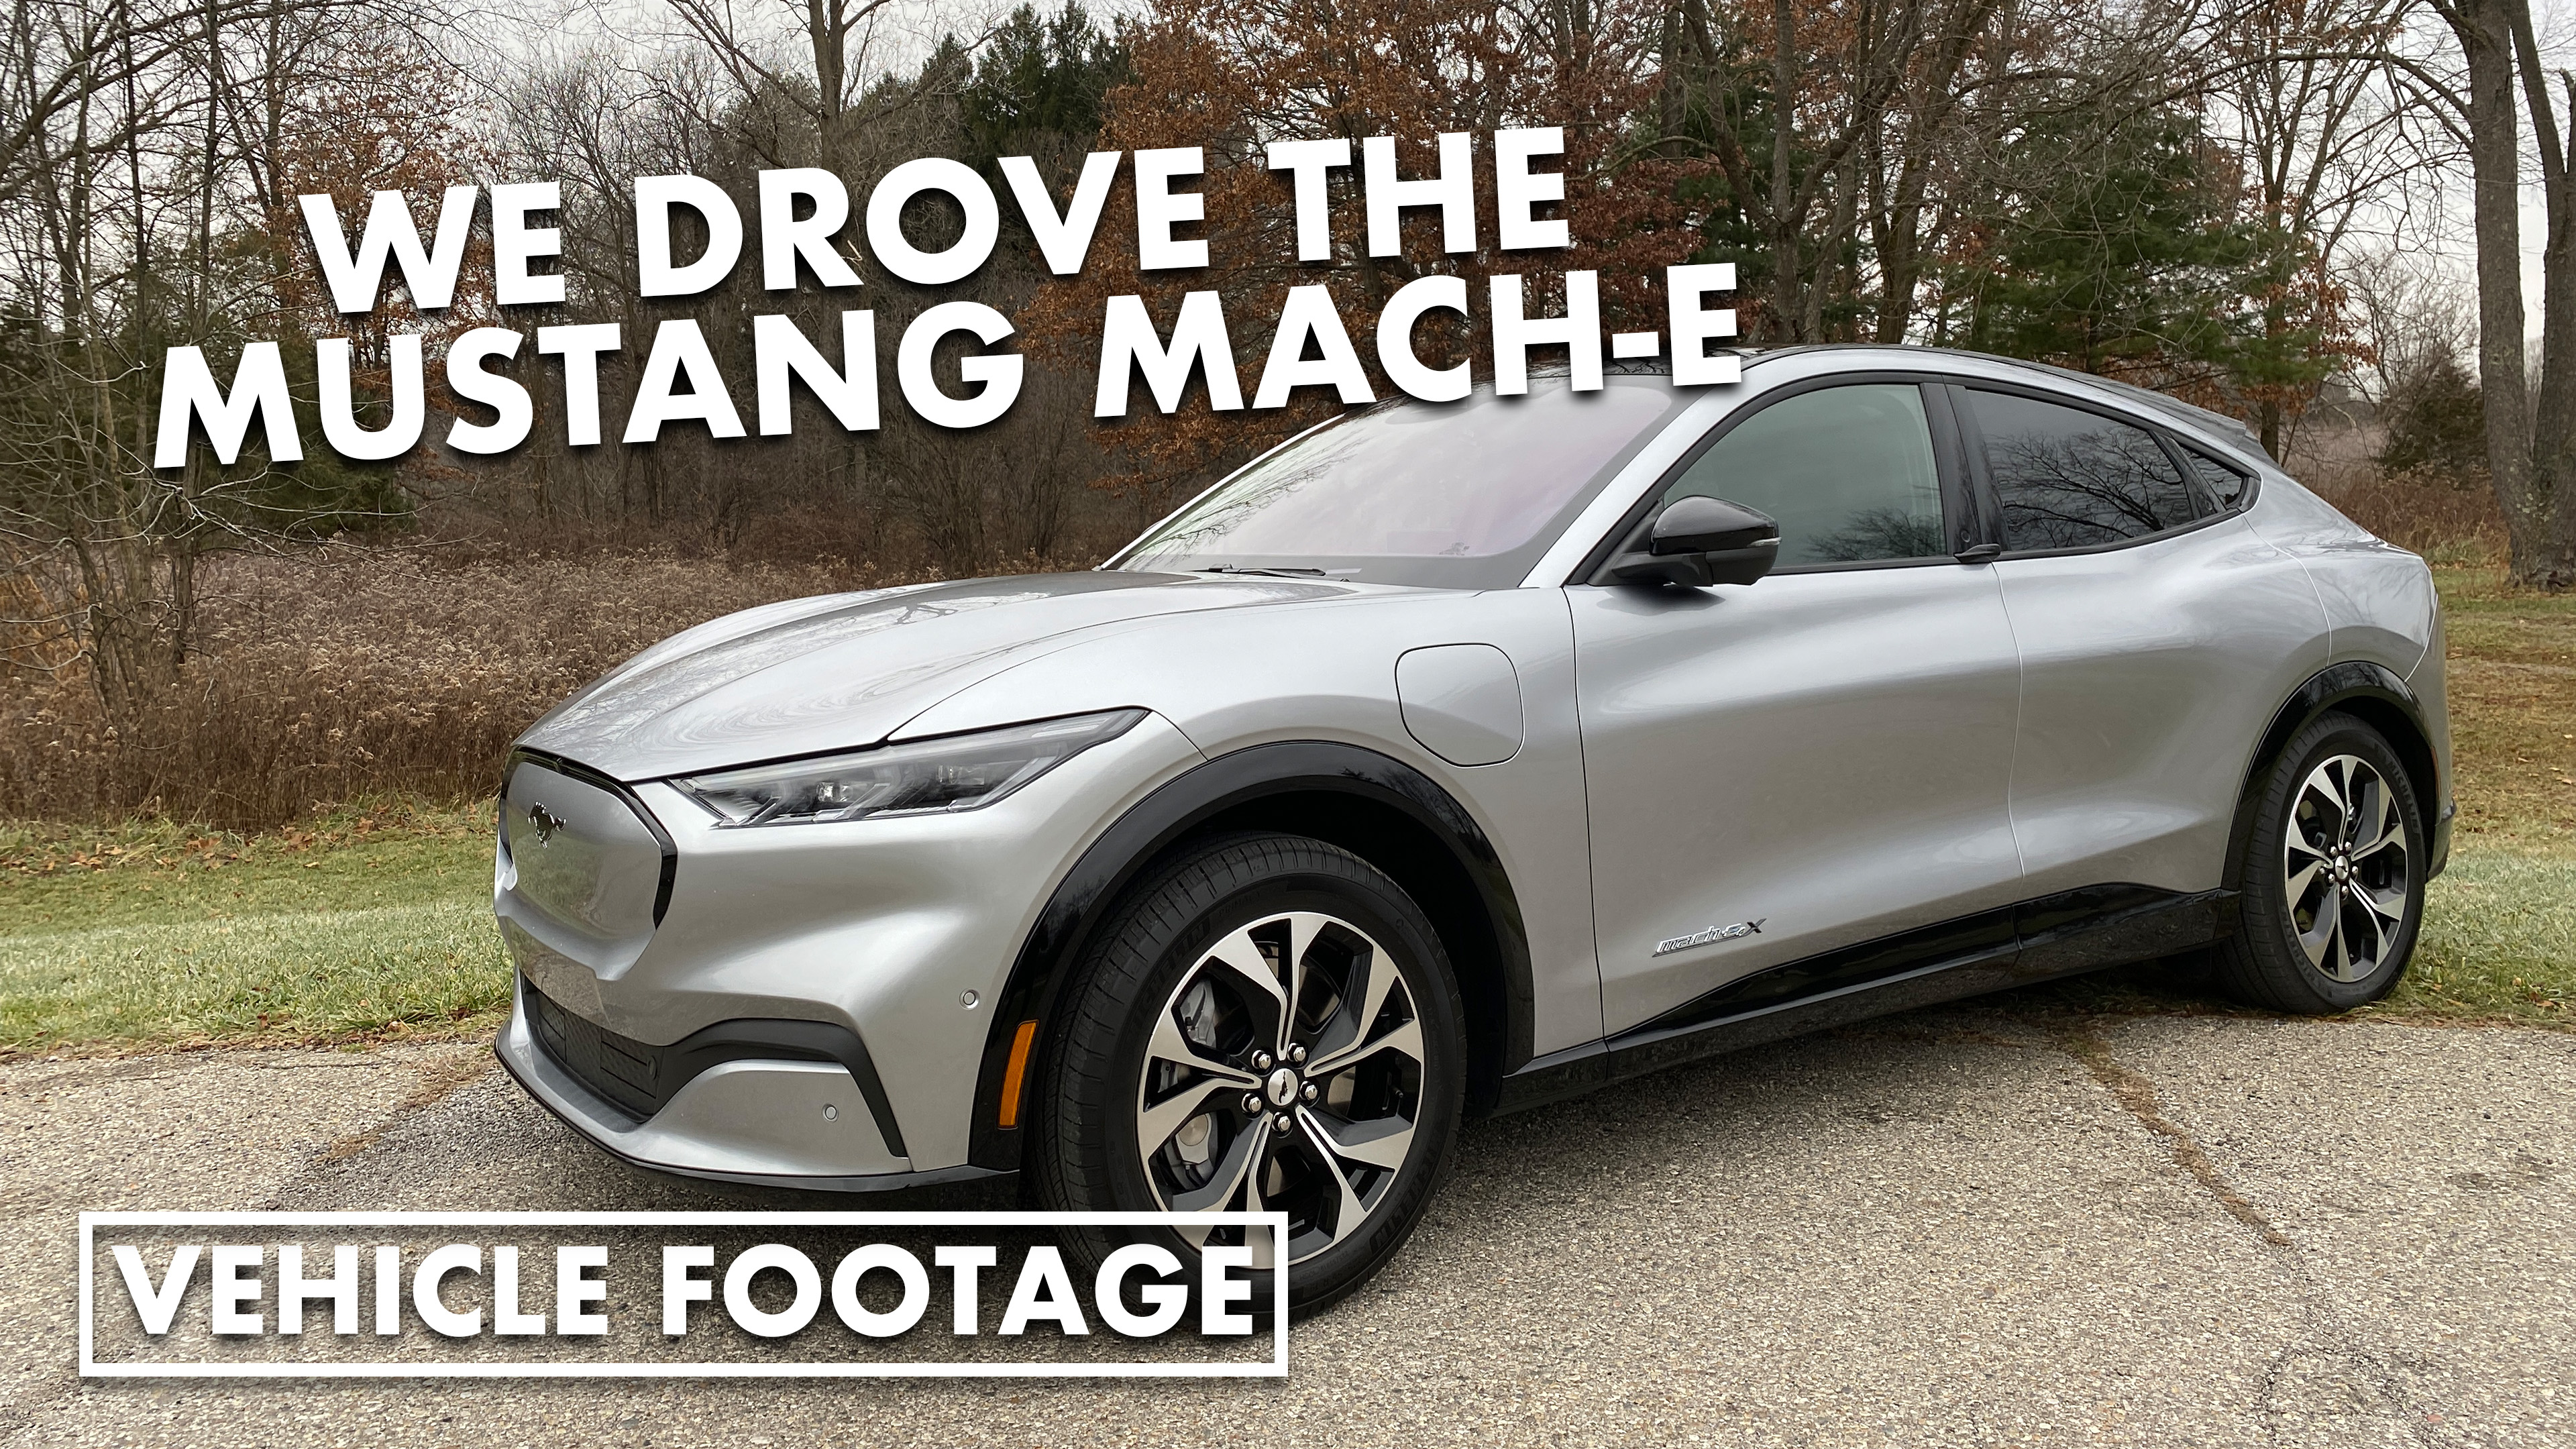 21 Ford Mustang Mach E First Drive Electric Range Performance Pricing Features